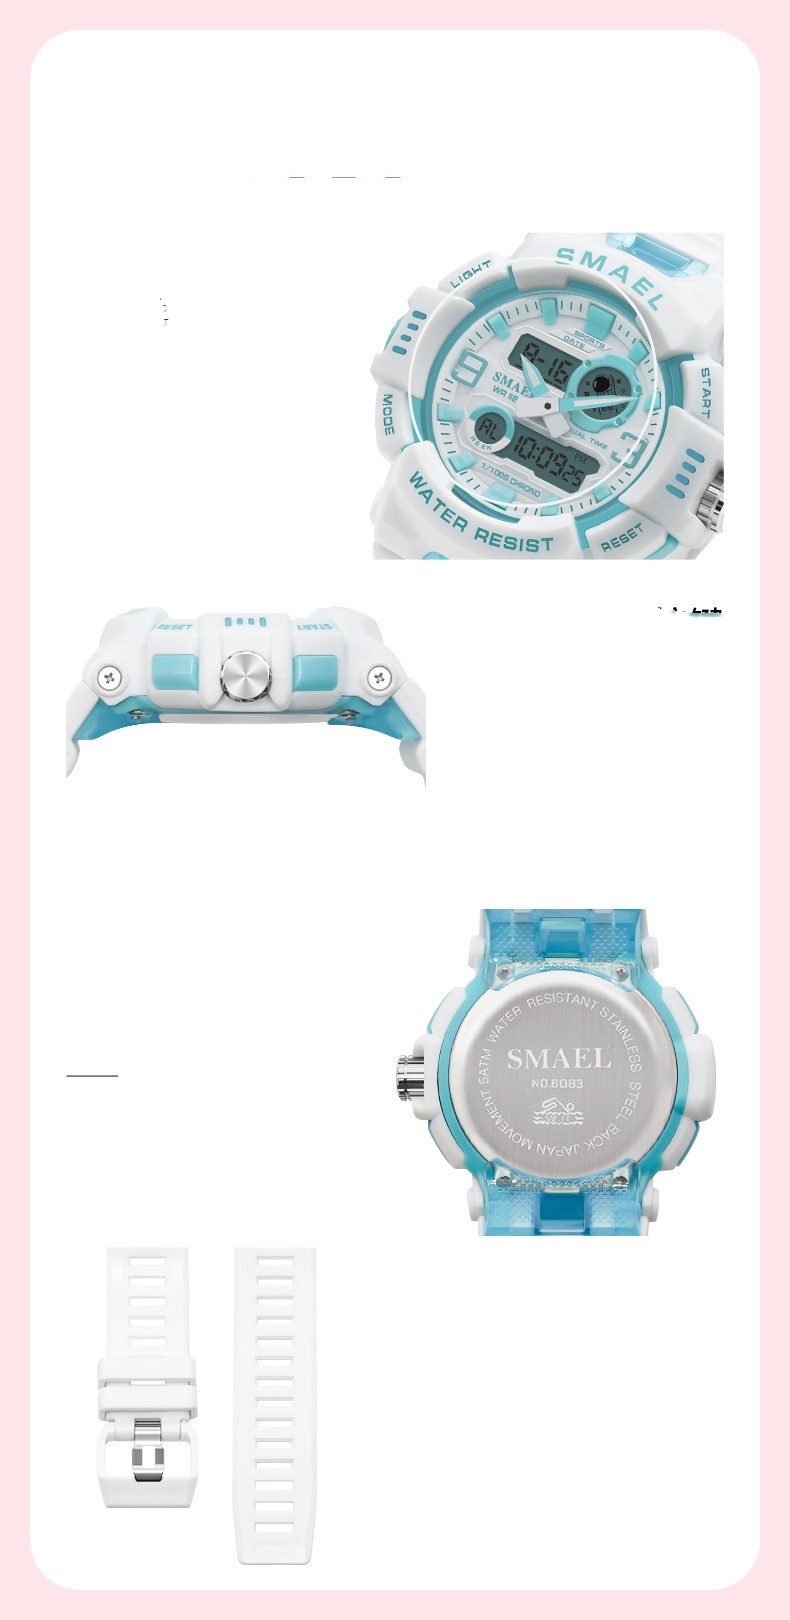 SMAEL Candy Color Sports Multifunctional Analog Digital Watch for men 8083